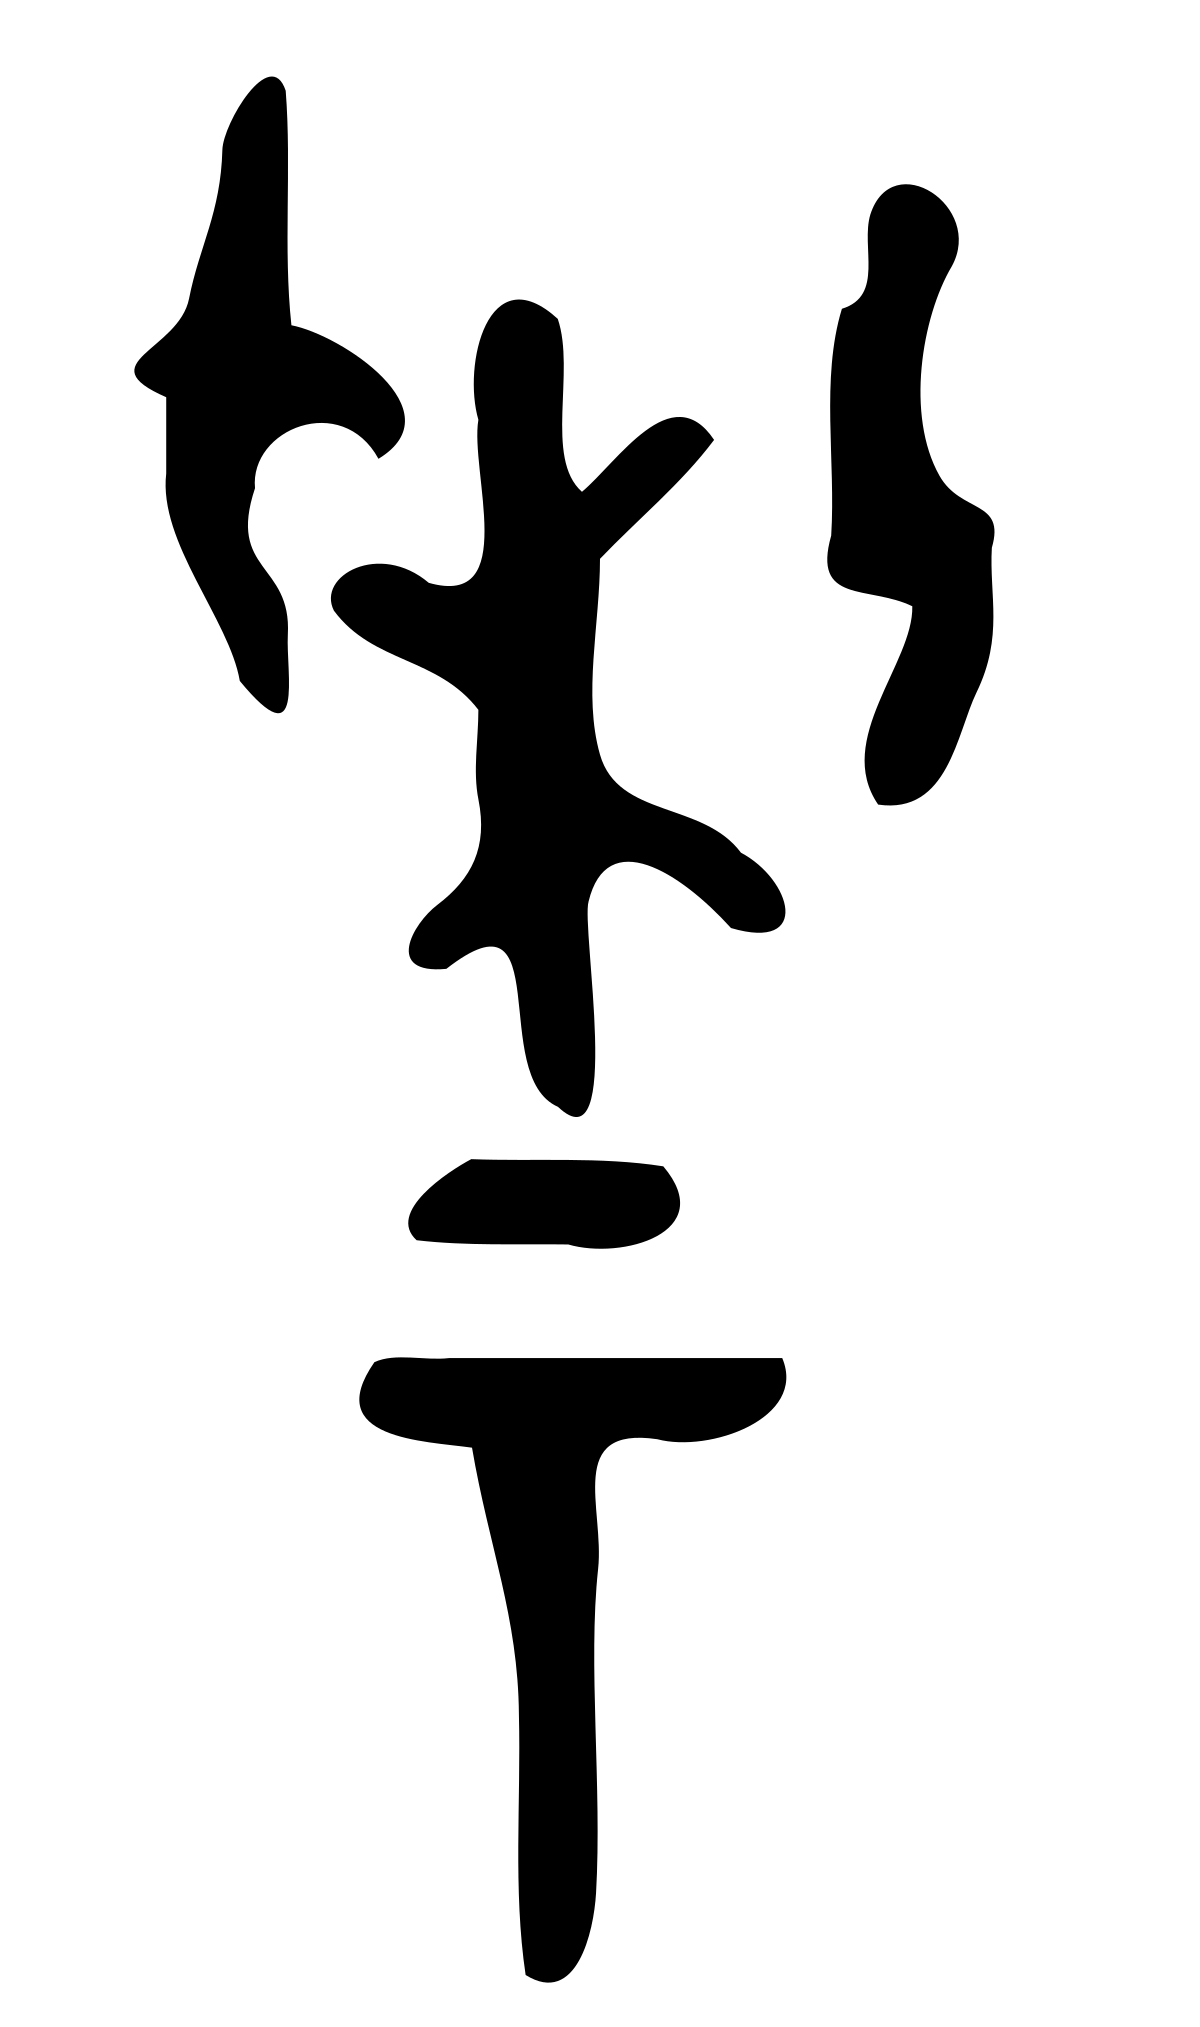 Oracle bone script character Chai - burning plant for worshipping